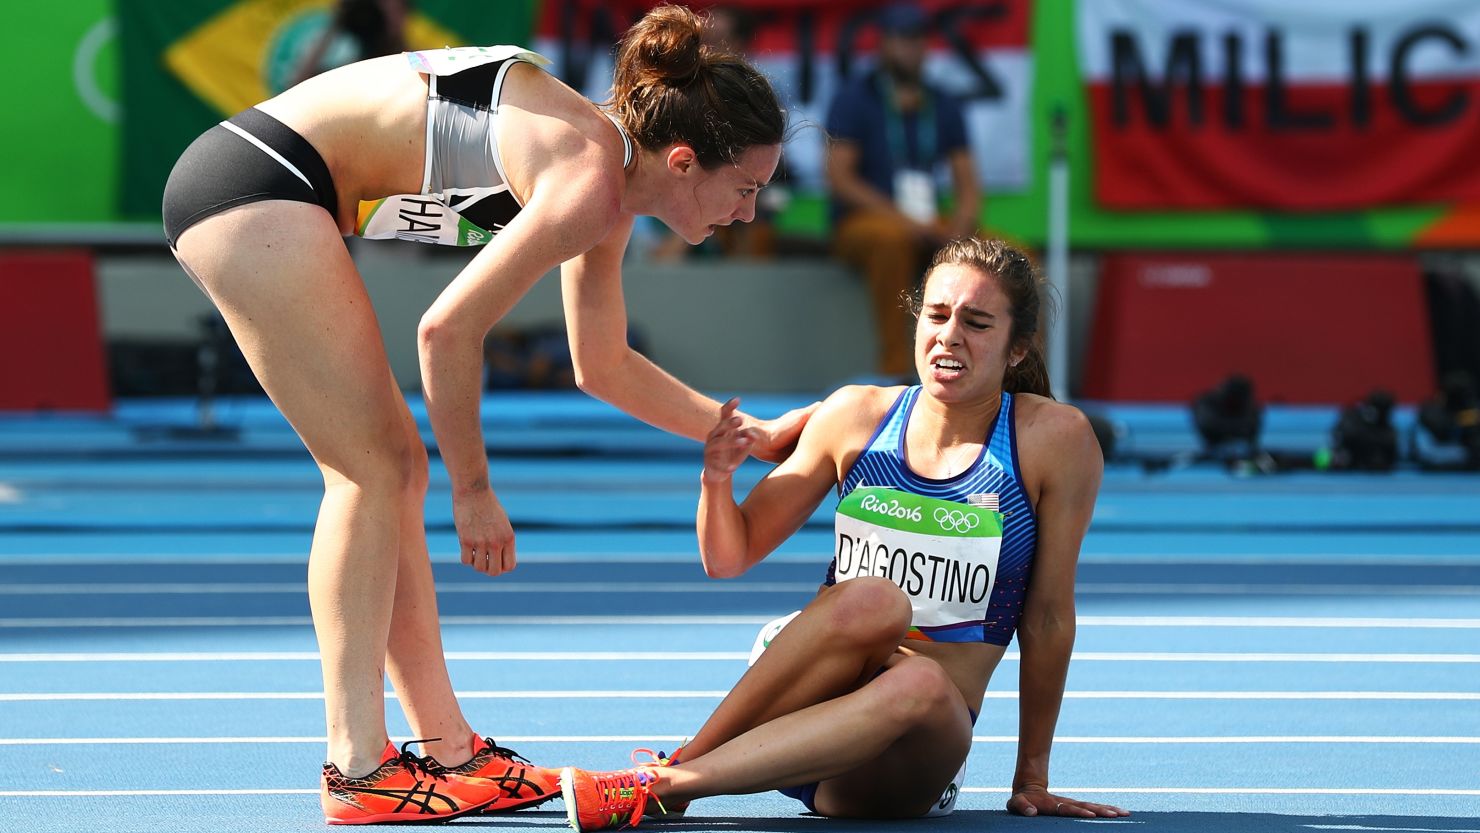 Runners Abbey D'Agostino of the US and NZ's Nikki Hamblin epitomized the Olympic spirit Tuesday.